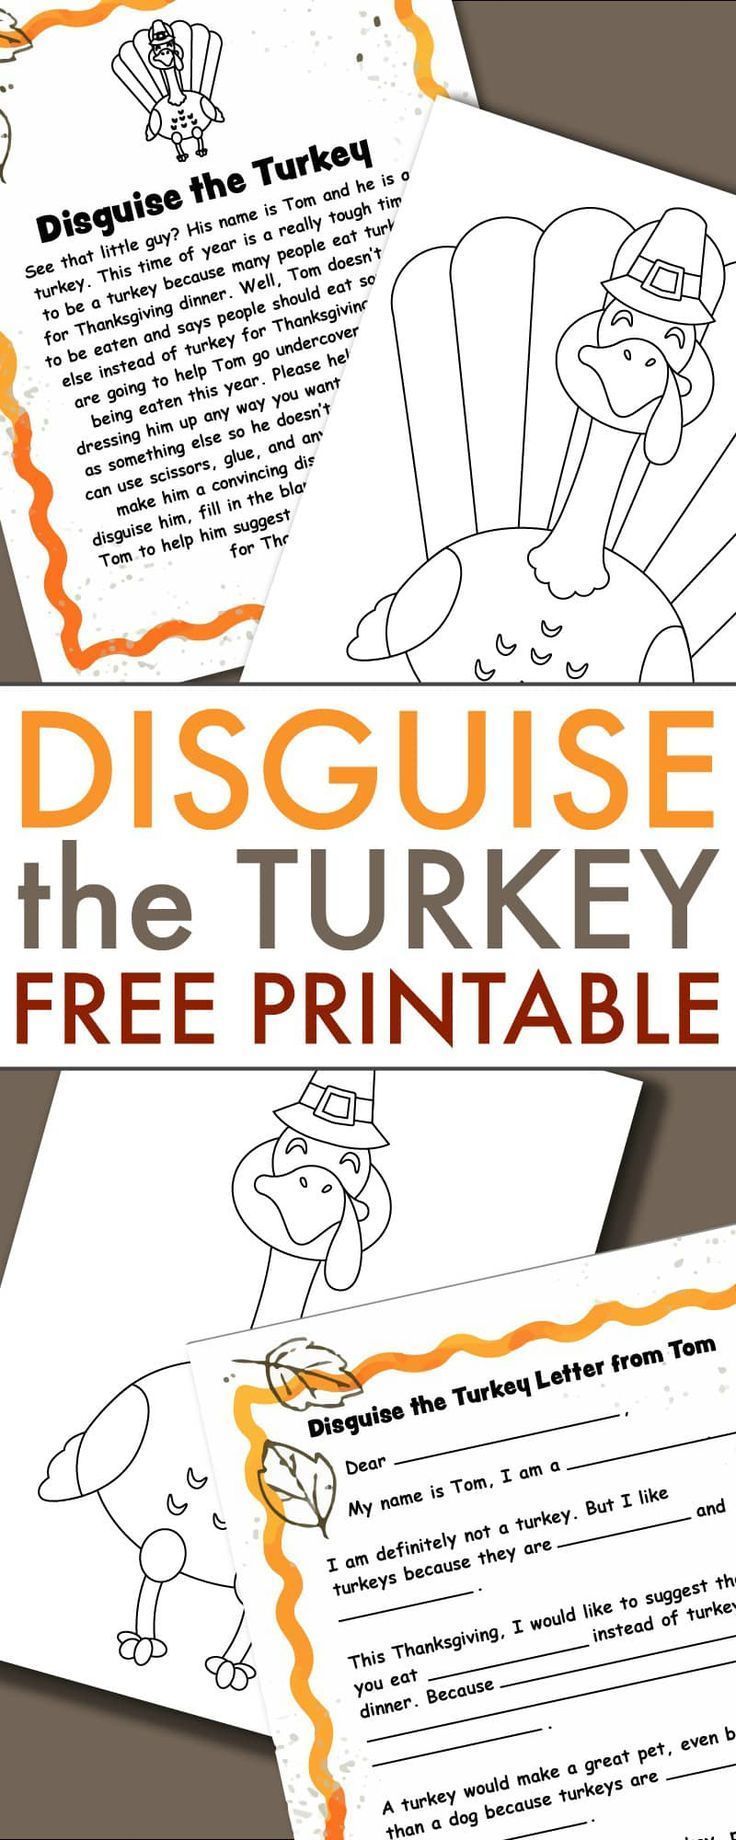 A Turkey in Disguise Project Free Printable Template -   16 disguise a turkey project ideas